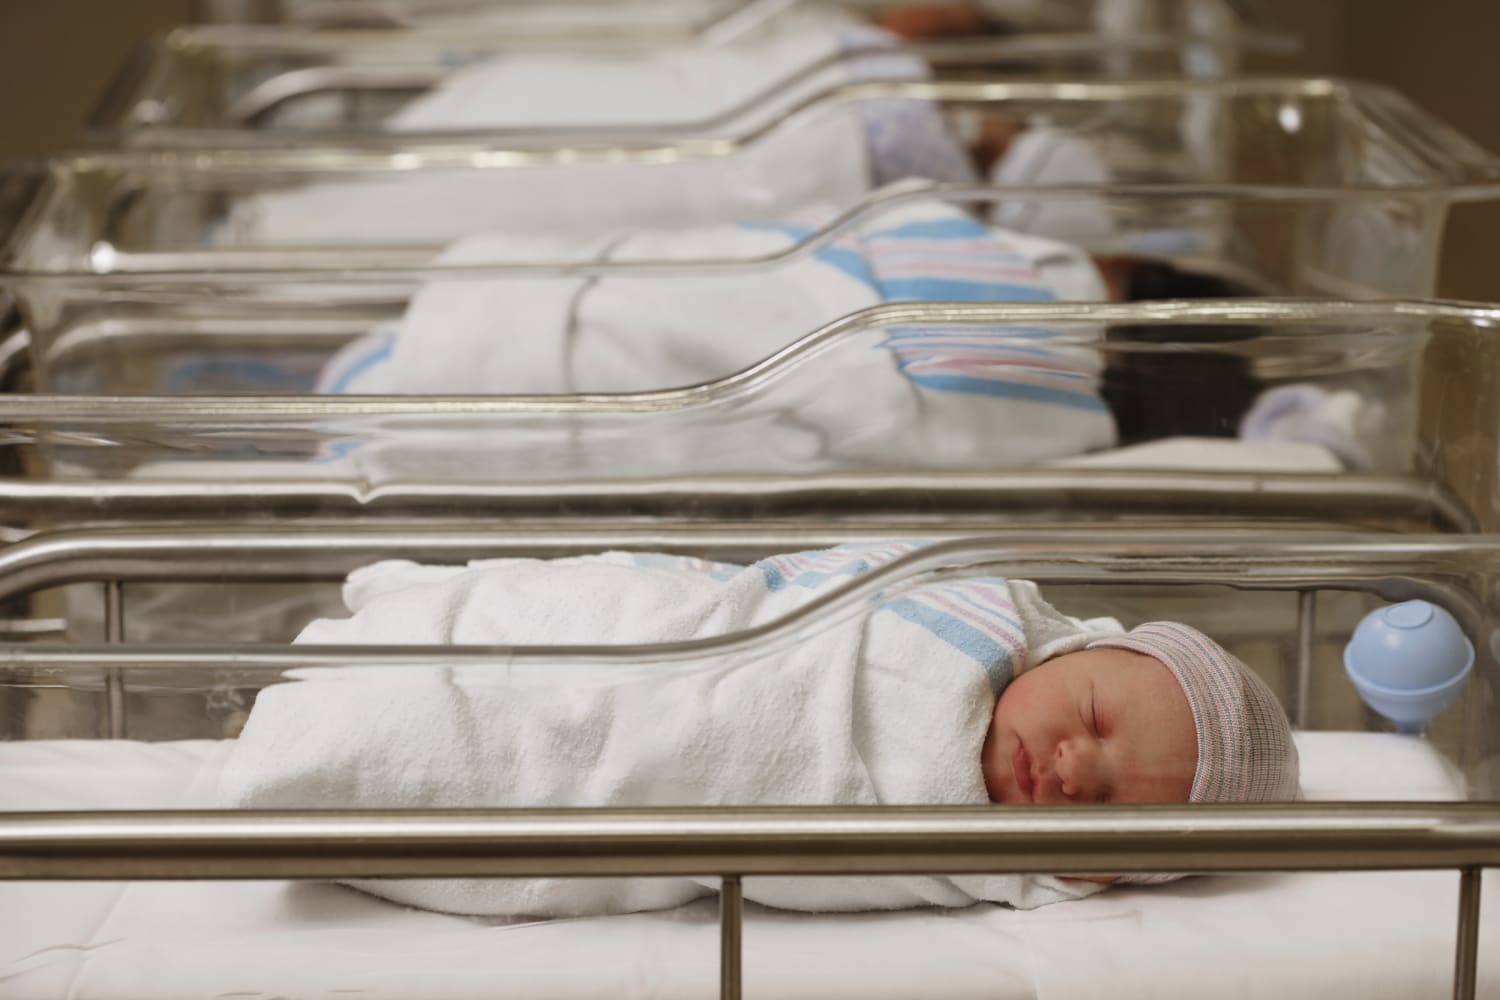 Teen birthrates hit another record low as progress starts to slow